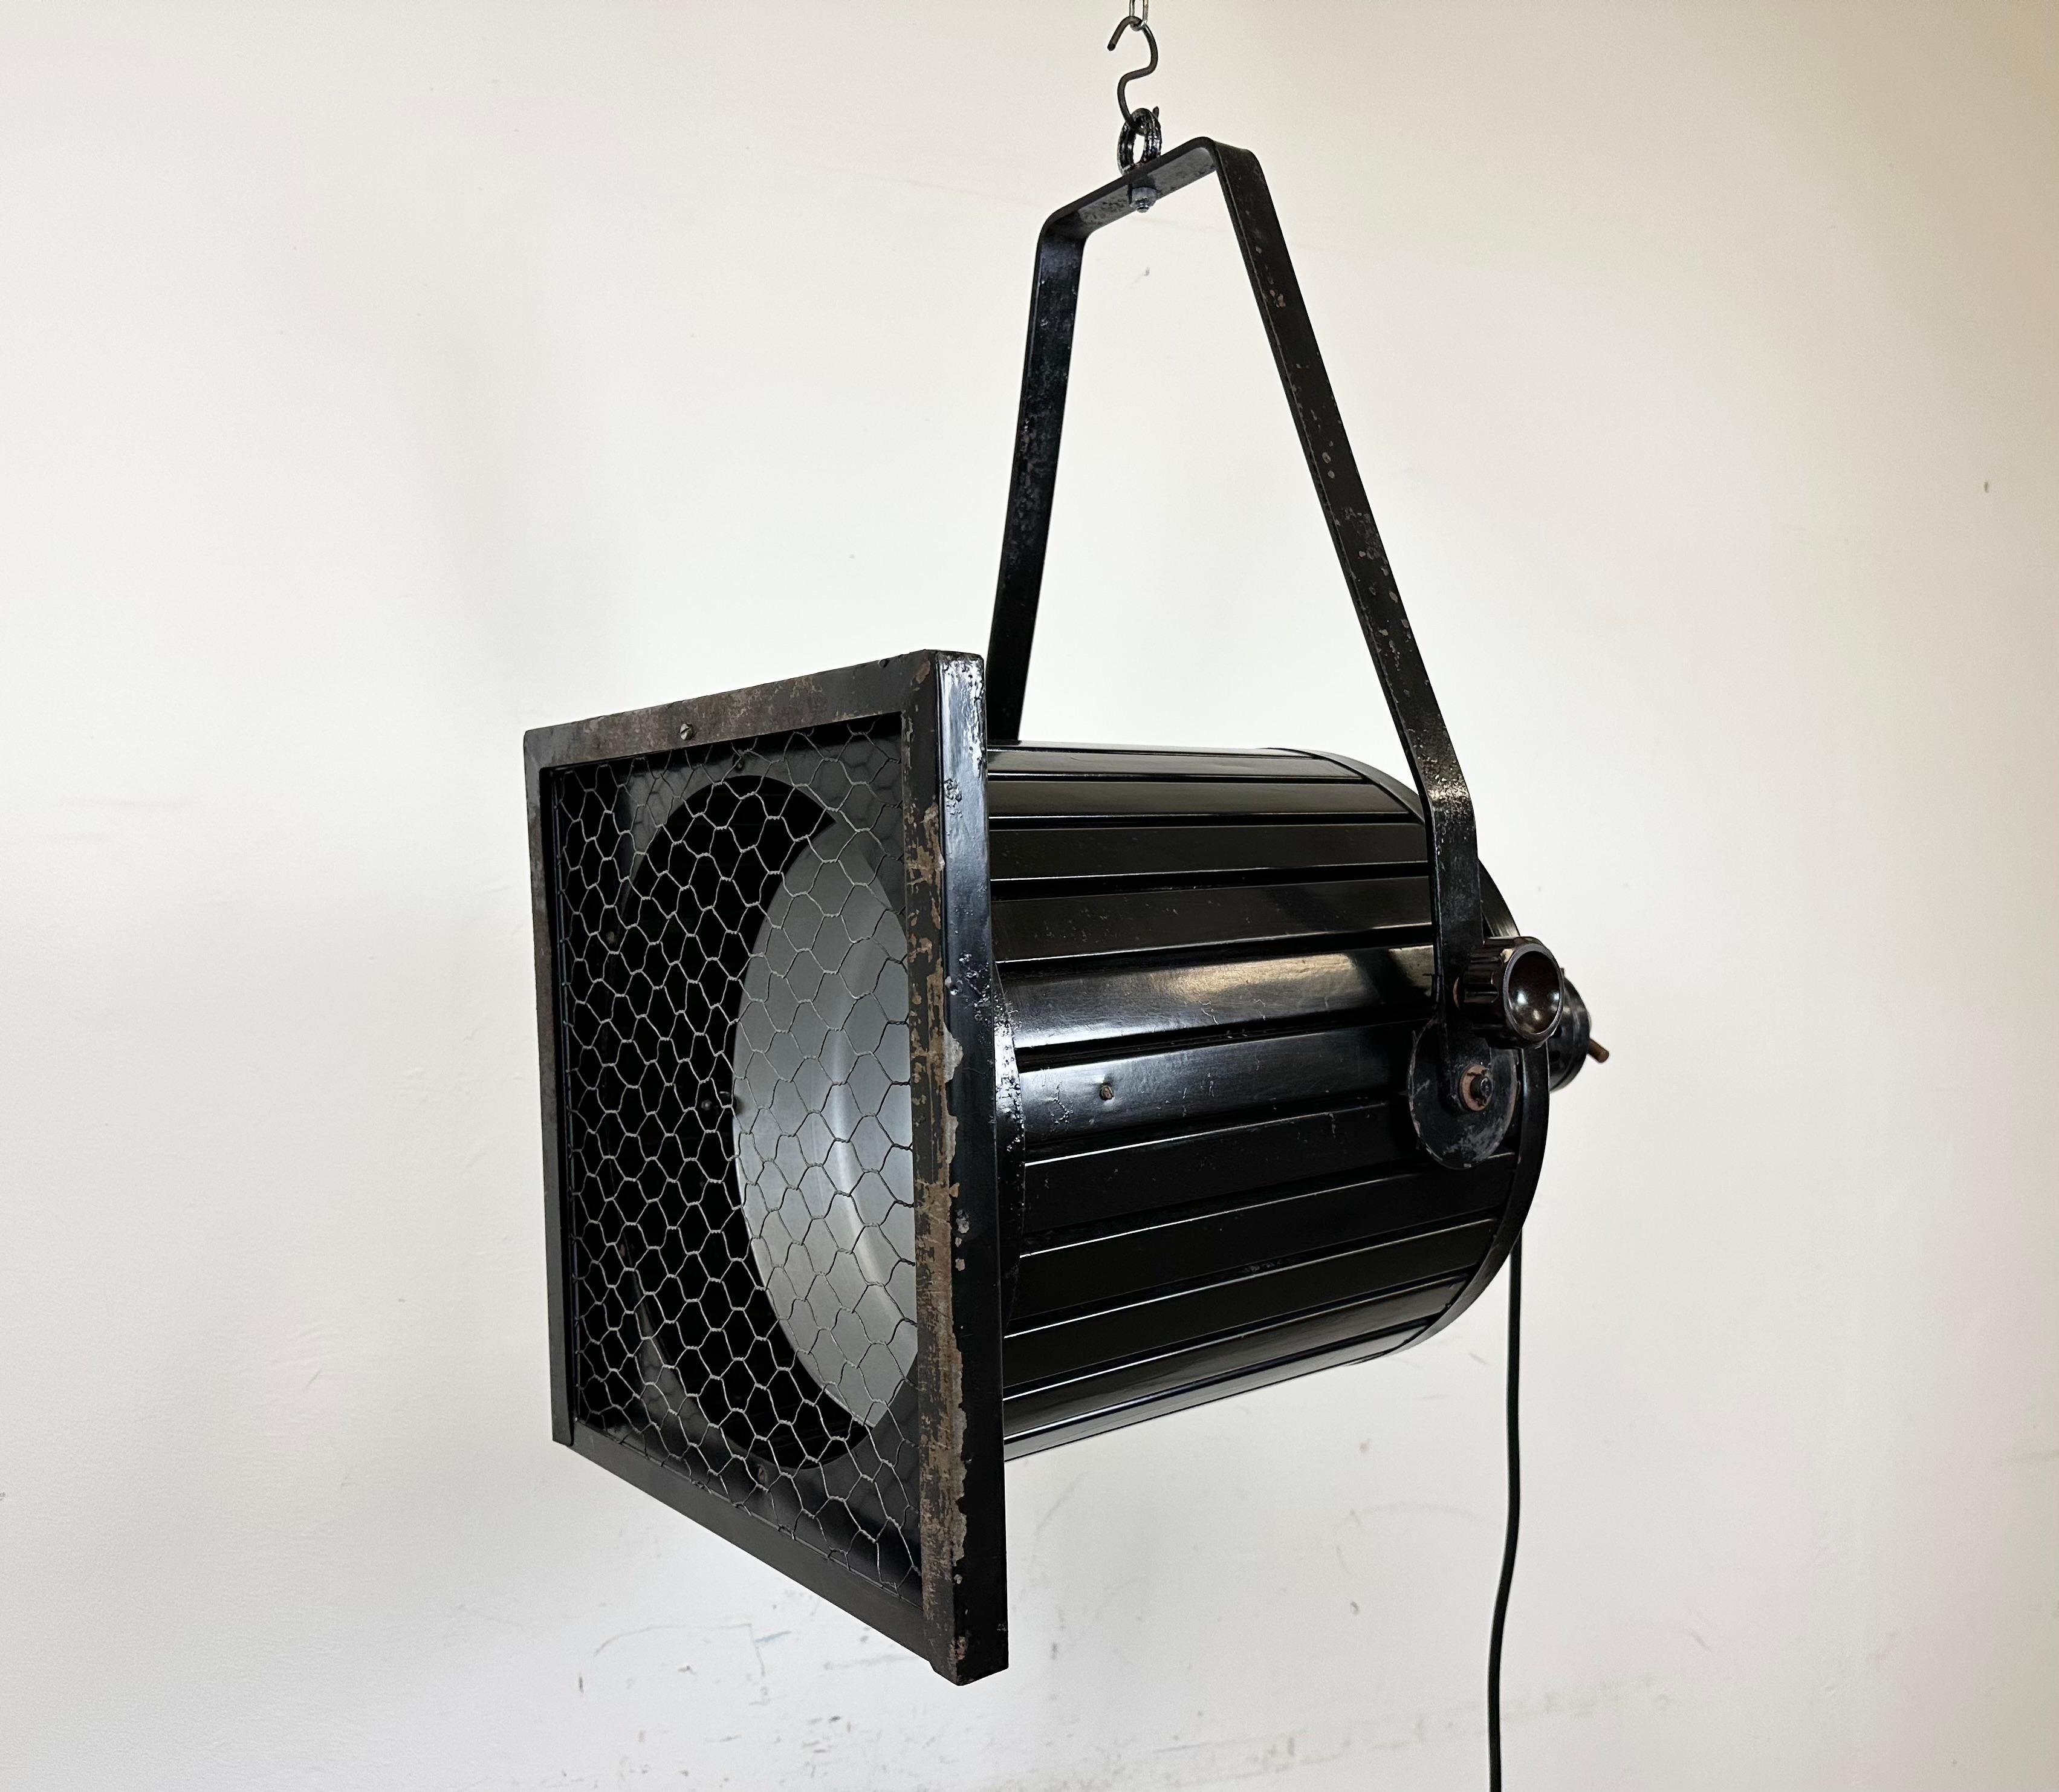 - Vintage theatre spotlight made in former Czechoslovakia during the 1960s 
- It features a black metal body and iron grid
- The porcelain socket requires standard E27/ E26 lightbulbs 
- New wire
-The height of the spotlight is 36 cm. With holder 67